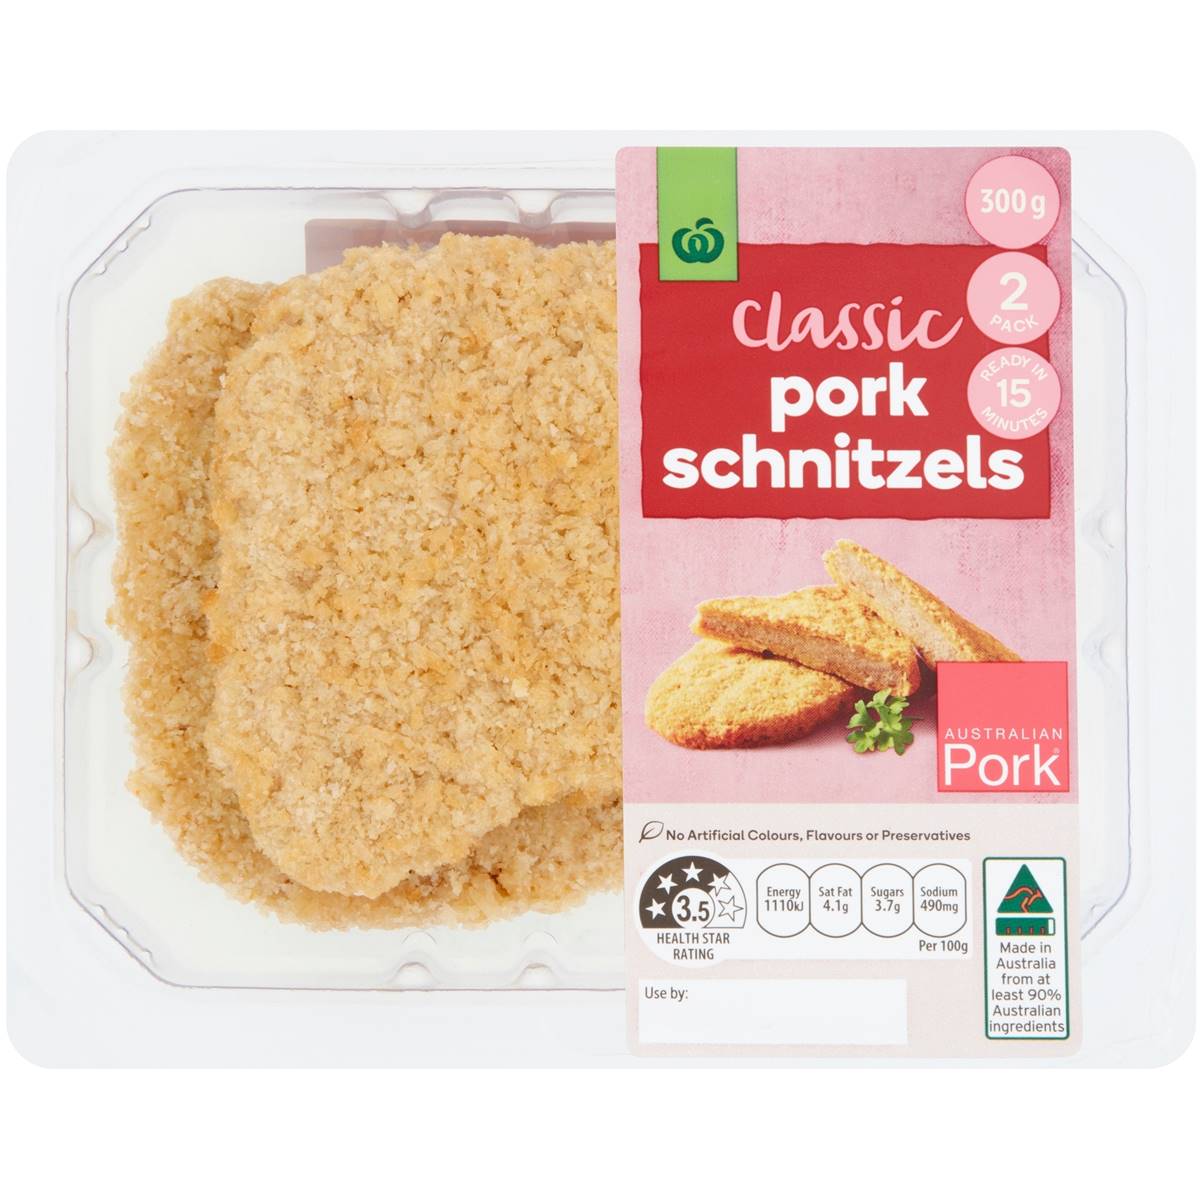 Calories in Woolworths Crumbed Pork Schnitzels